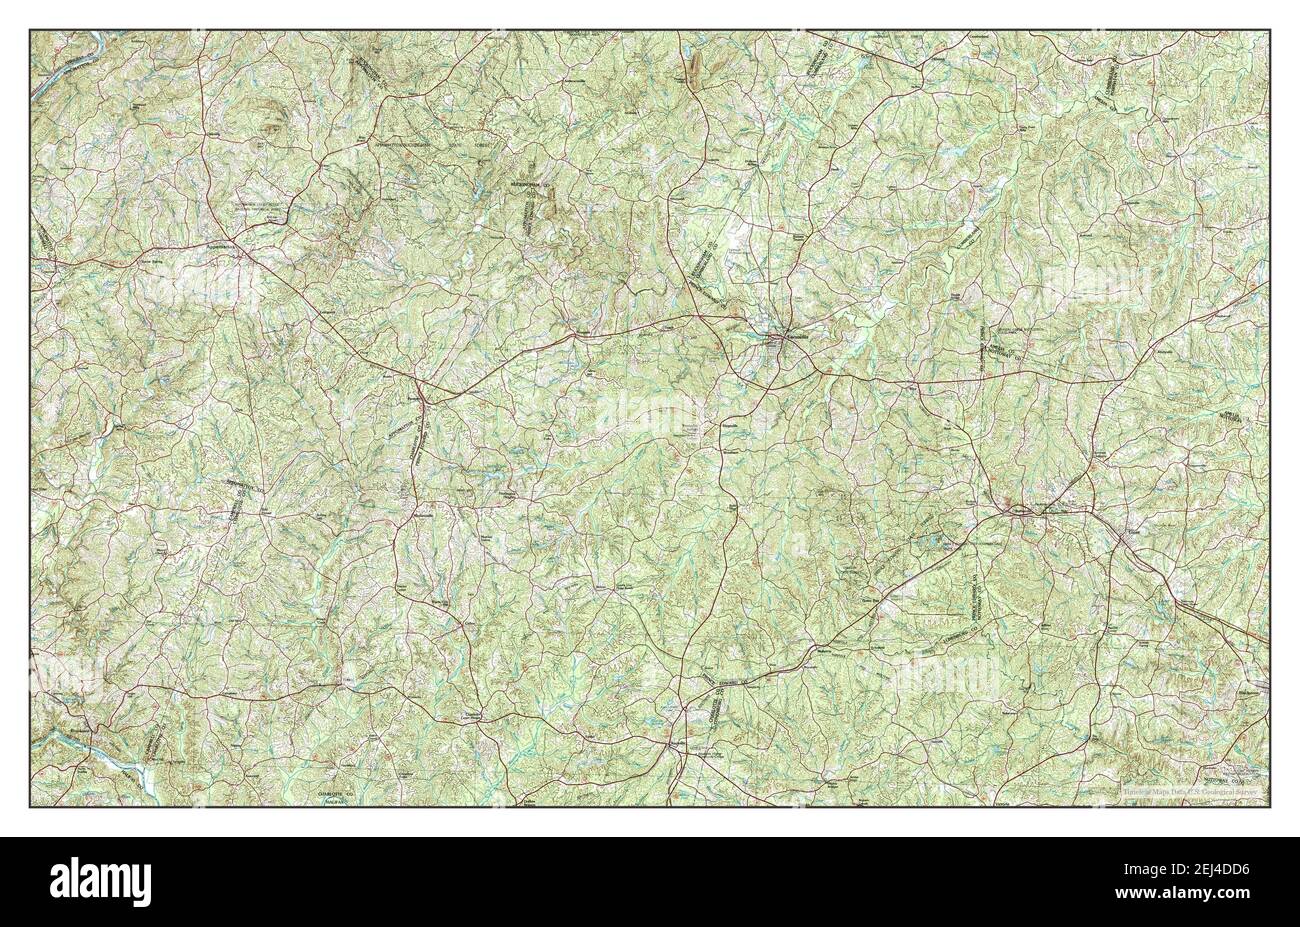 Appomattox, Virginia, map 1979, 1:100000, United States of America by Timeless Maps, data U.S. Geological Survey Stock Photo